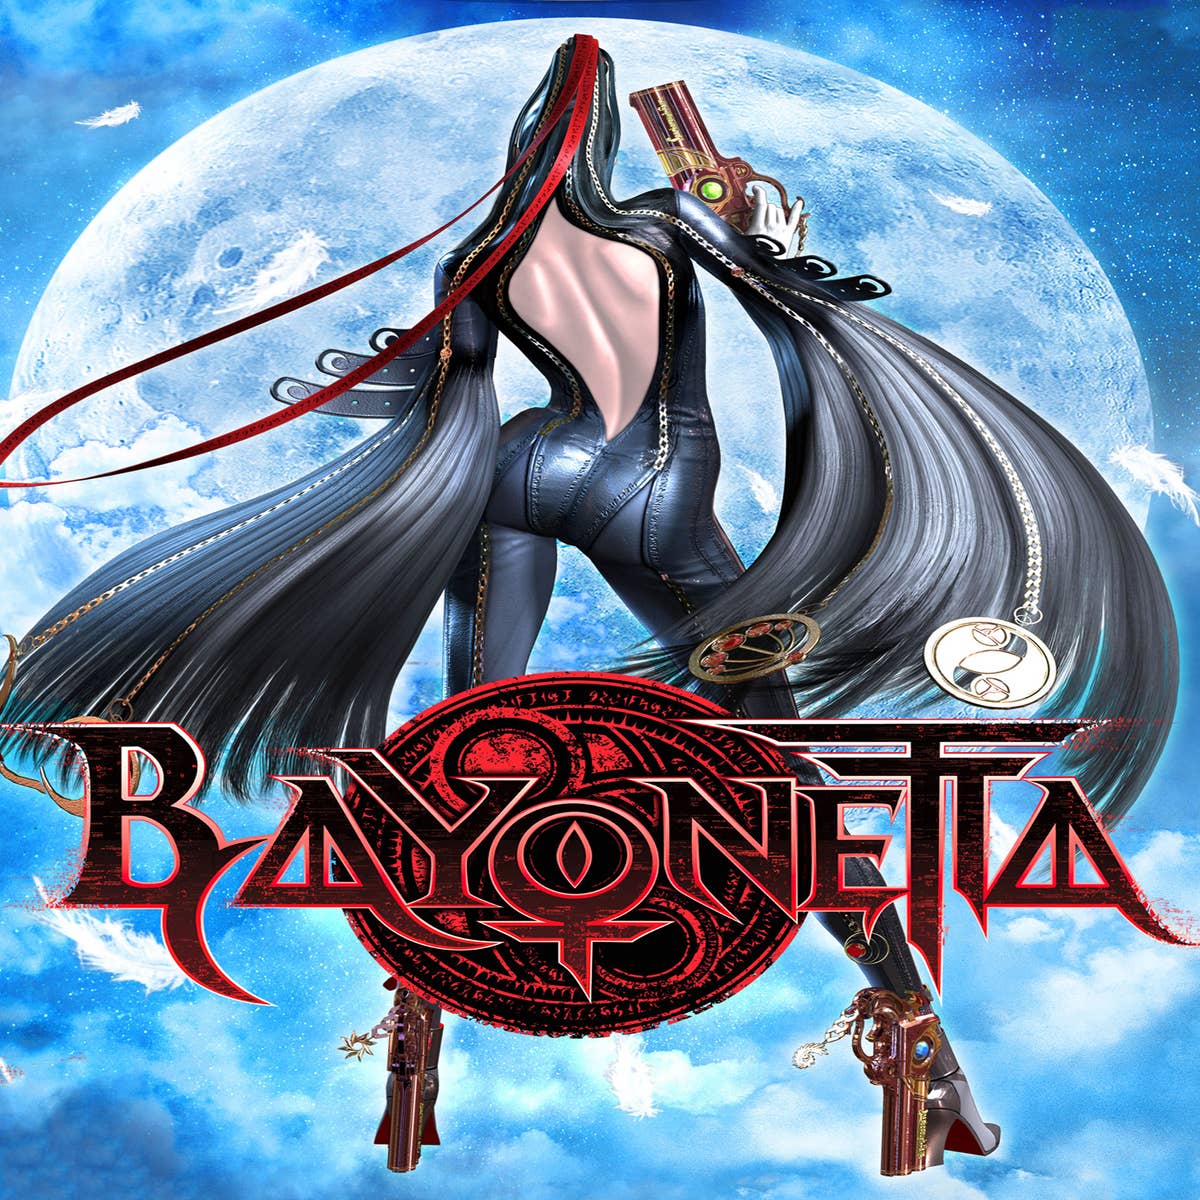 Bayonetta Switch physical edition delayed in UK and Europe